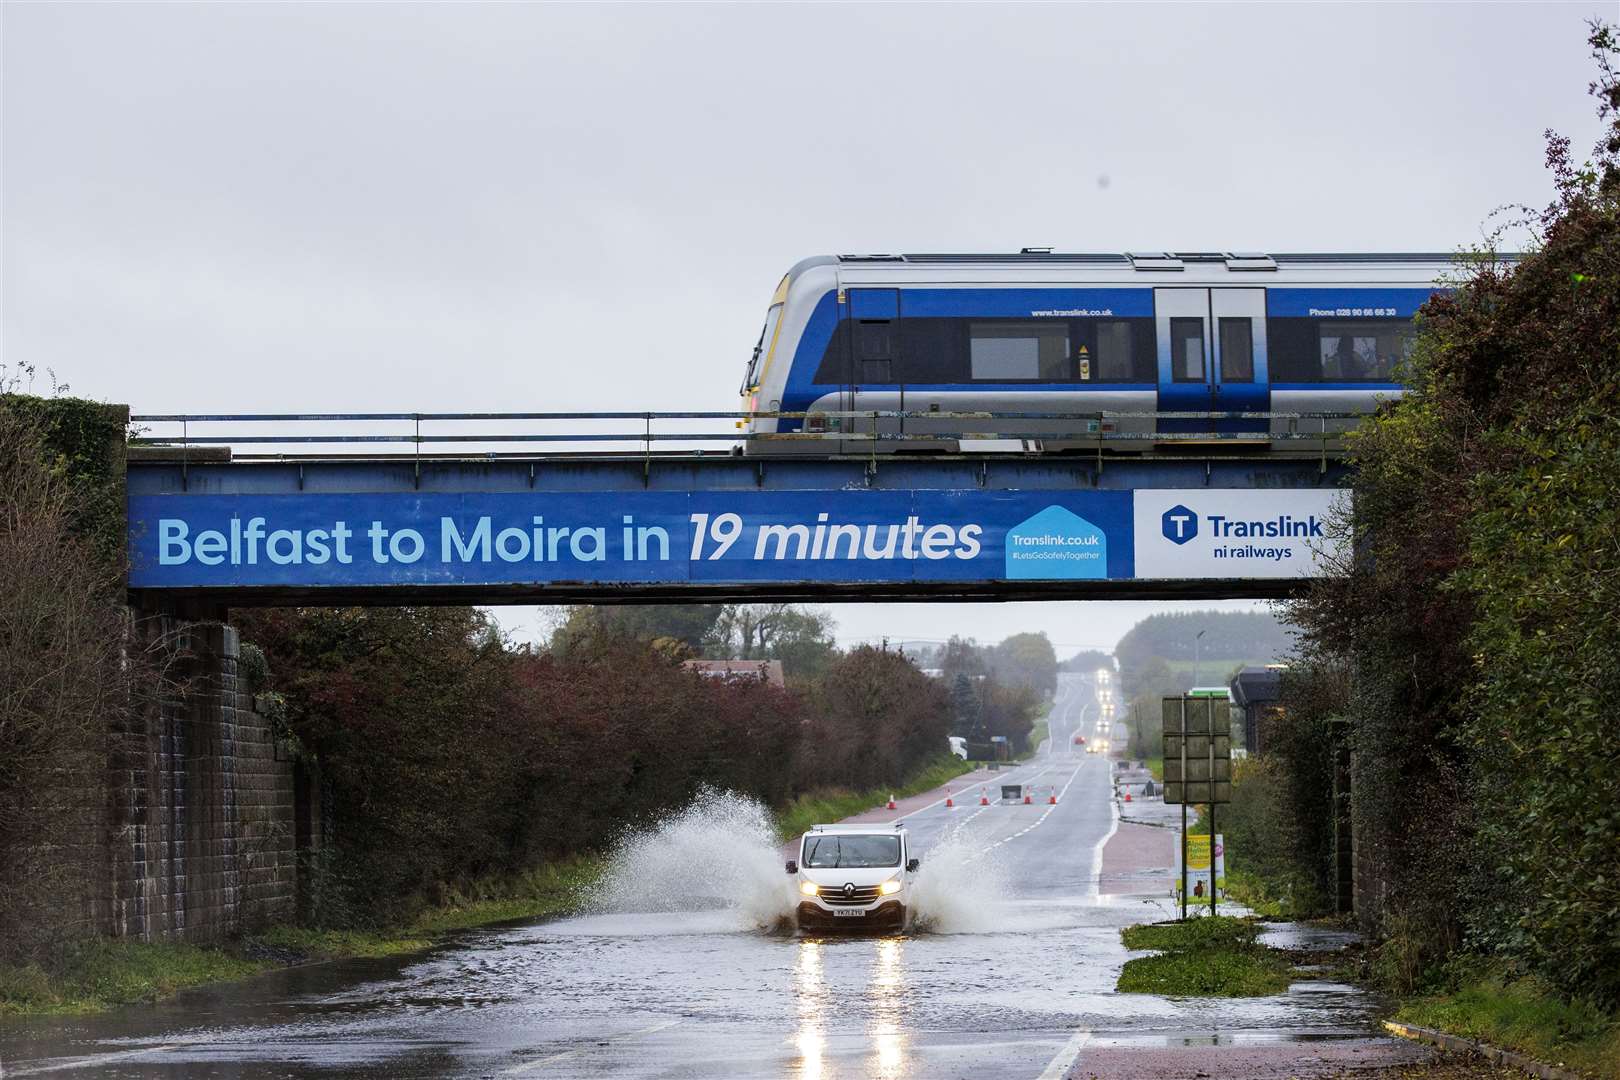 A van drives through a flooded area under a railway bridge as a train passes overhead on the A26 outside the village of Moira in Northern Ireland (Liam McBurney/PA).